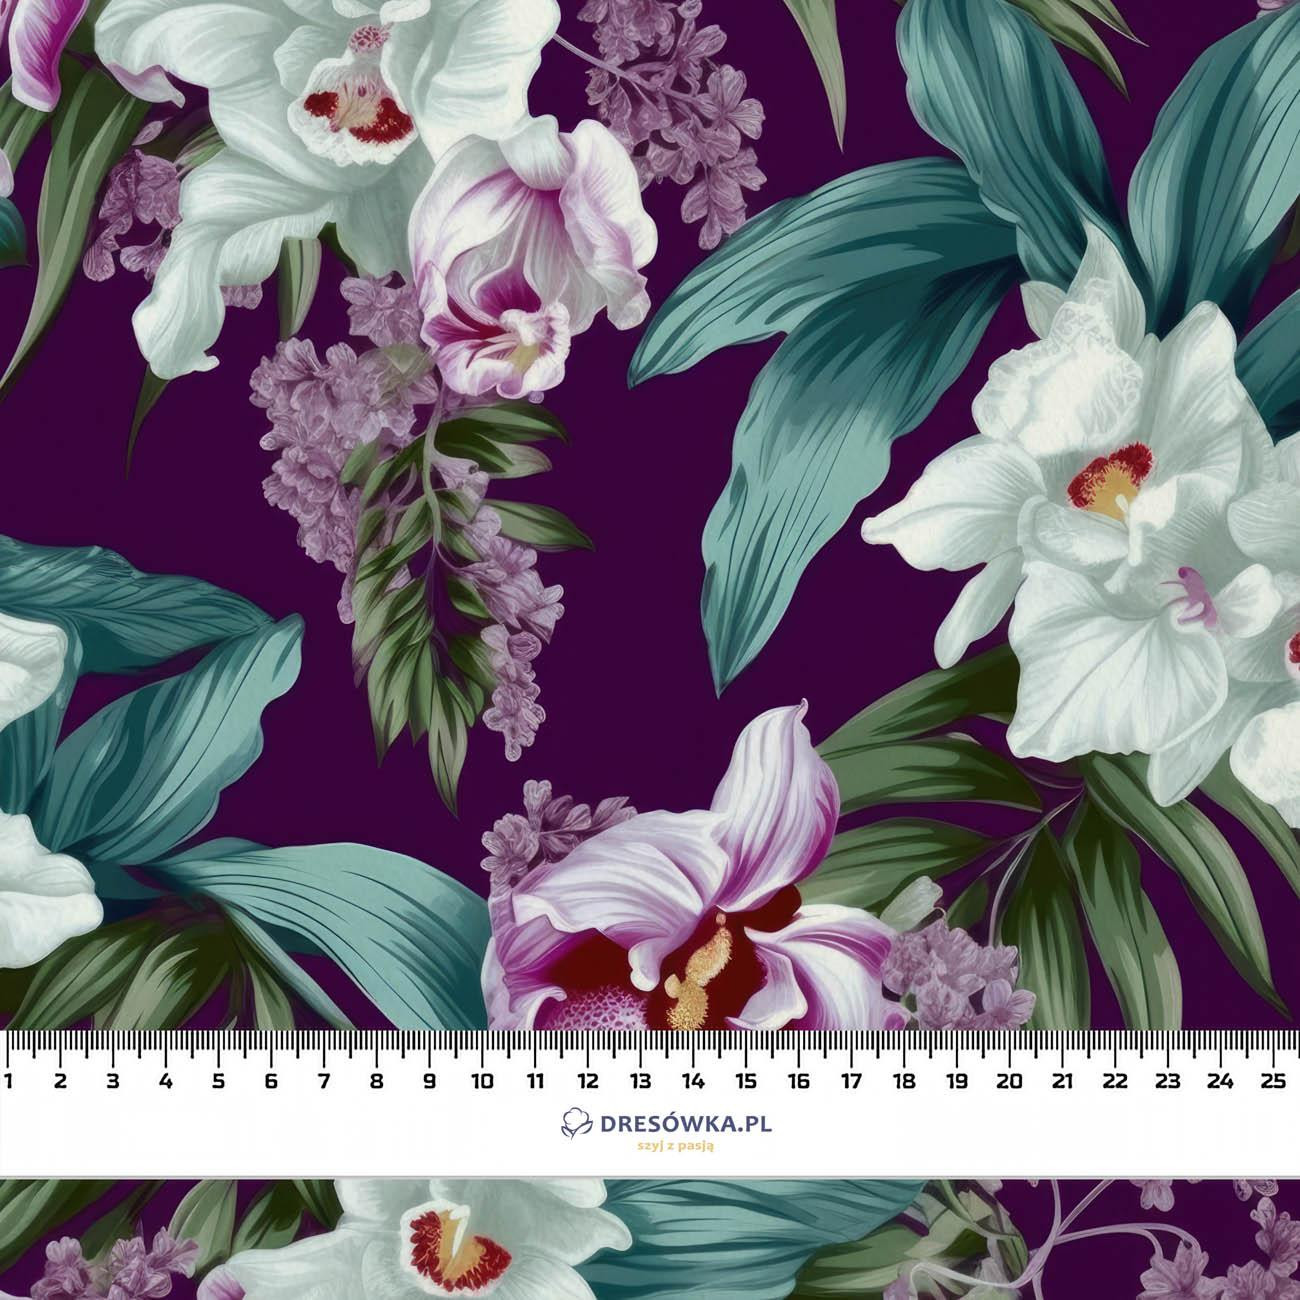 EXOTIC ORCHIDS PAT. 4 - quick-drying woven fabric